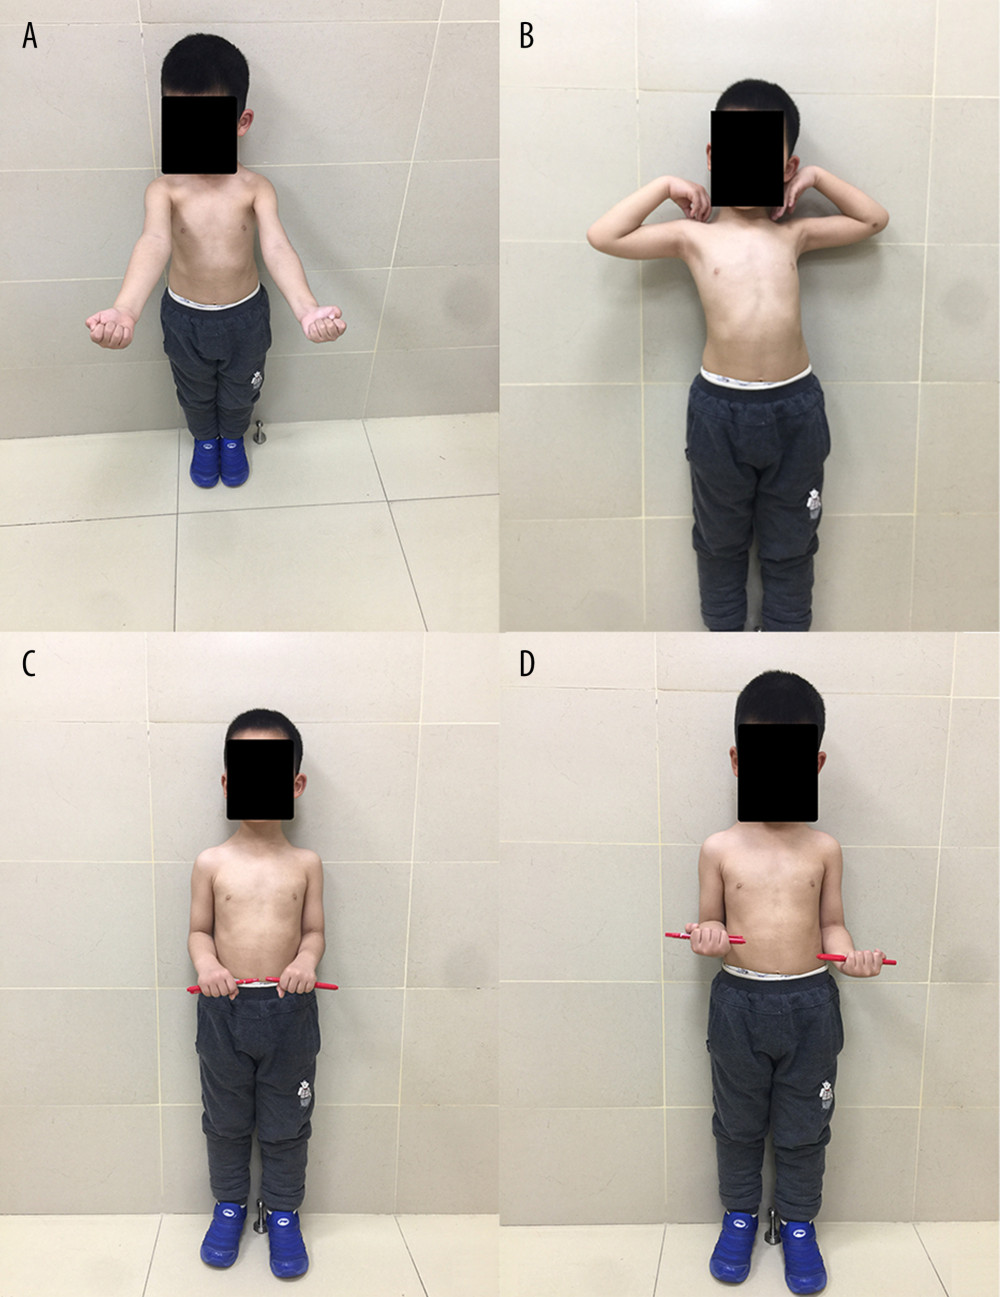 Clinical outcome at the last follow-up showed excellent function. (A, B) Elbow joint has normal flexion and extension function. (C, D) Elbow joint has normal pronation and supination function.